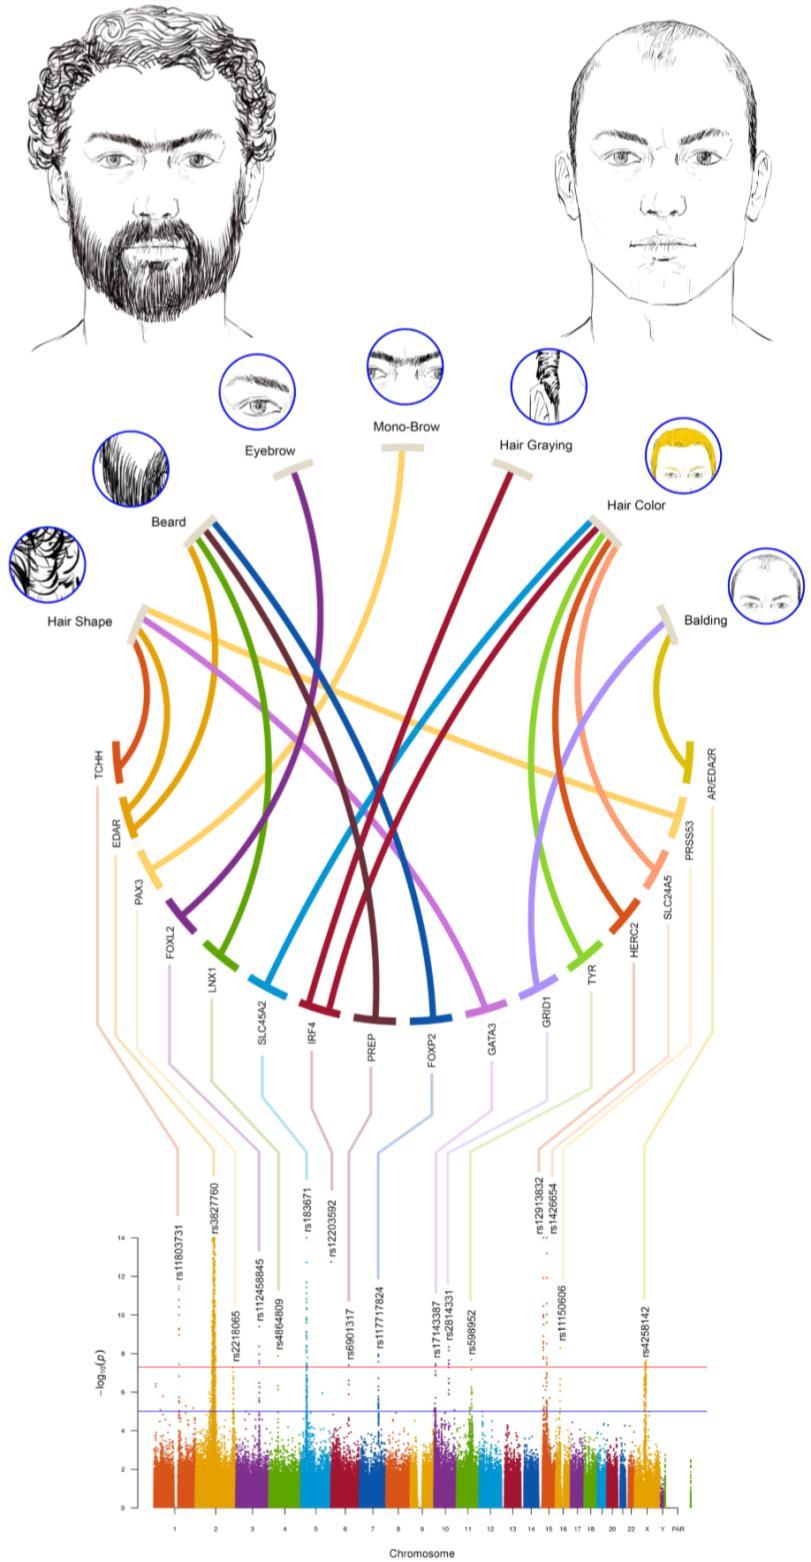 THE GENETIC BASIS OF VARIATION IN FACIAL AND SCALP HAIR: A GENOME-WIDE ASSOCIATION STUDY IN ADMIXED LATIN AMERICANS Kaustubh Adhikari Carla Gallo Andrés RuizLinares GWAS in > 6,000 Latin Americans